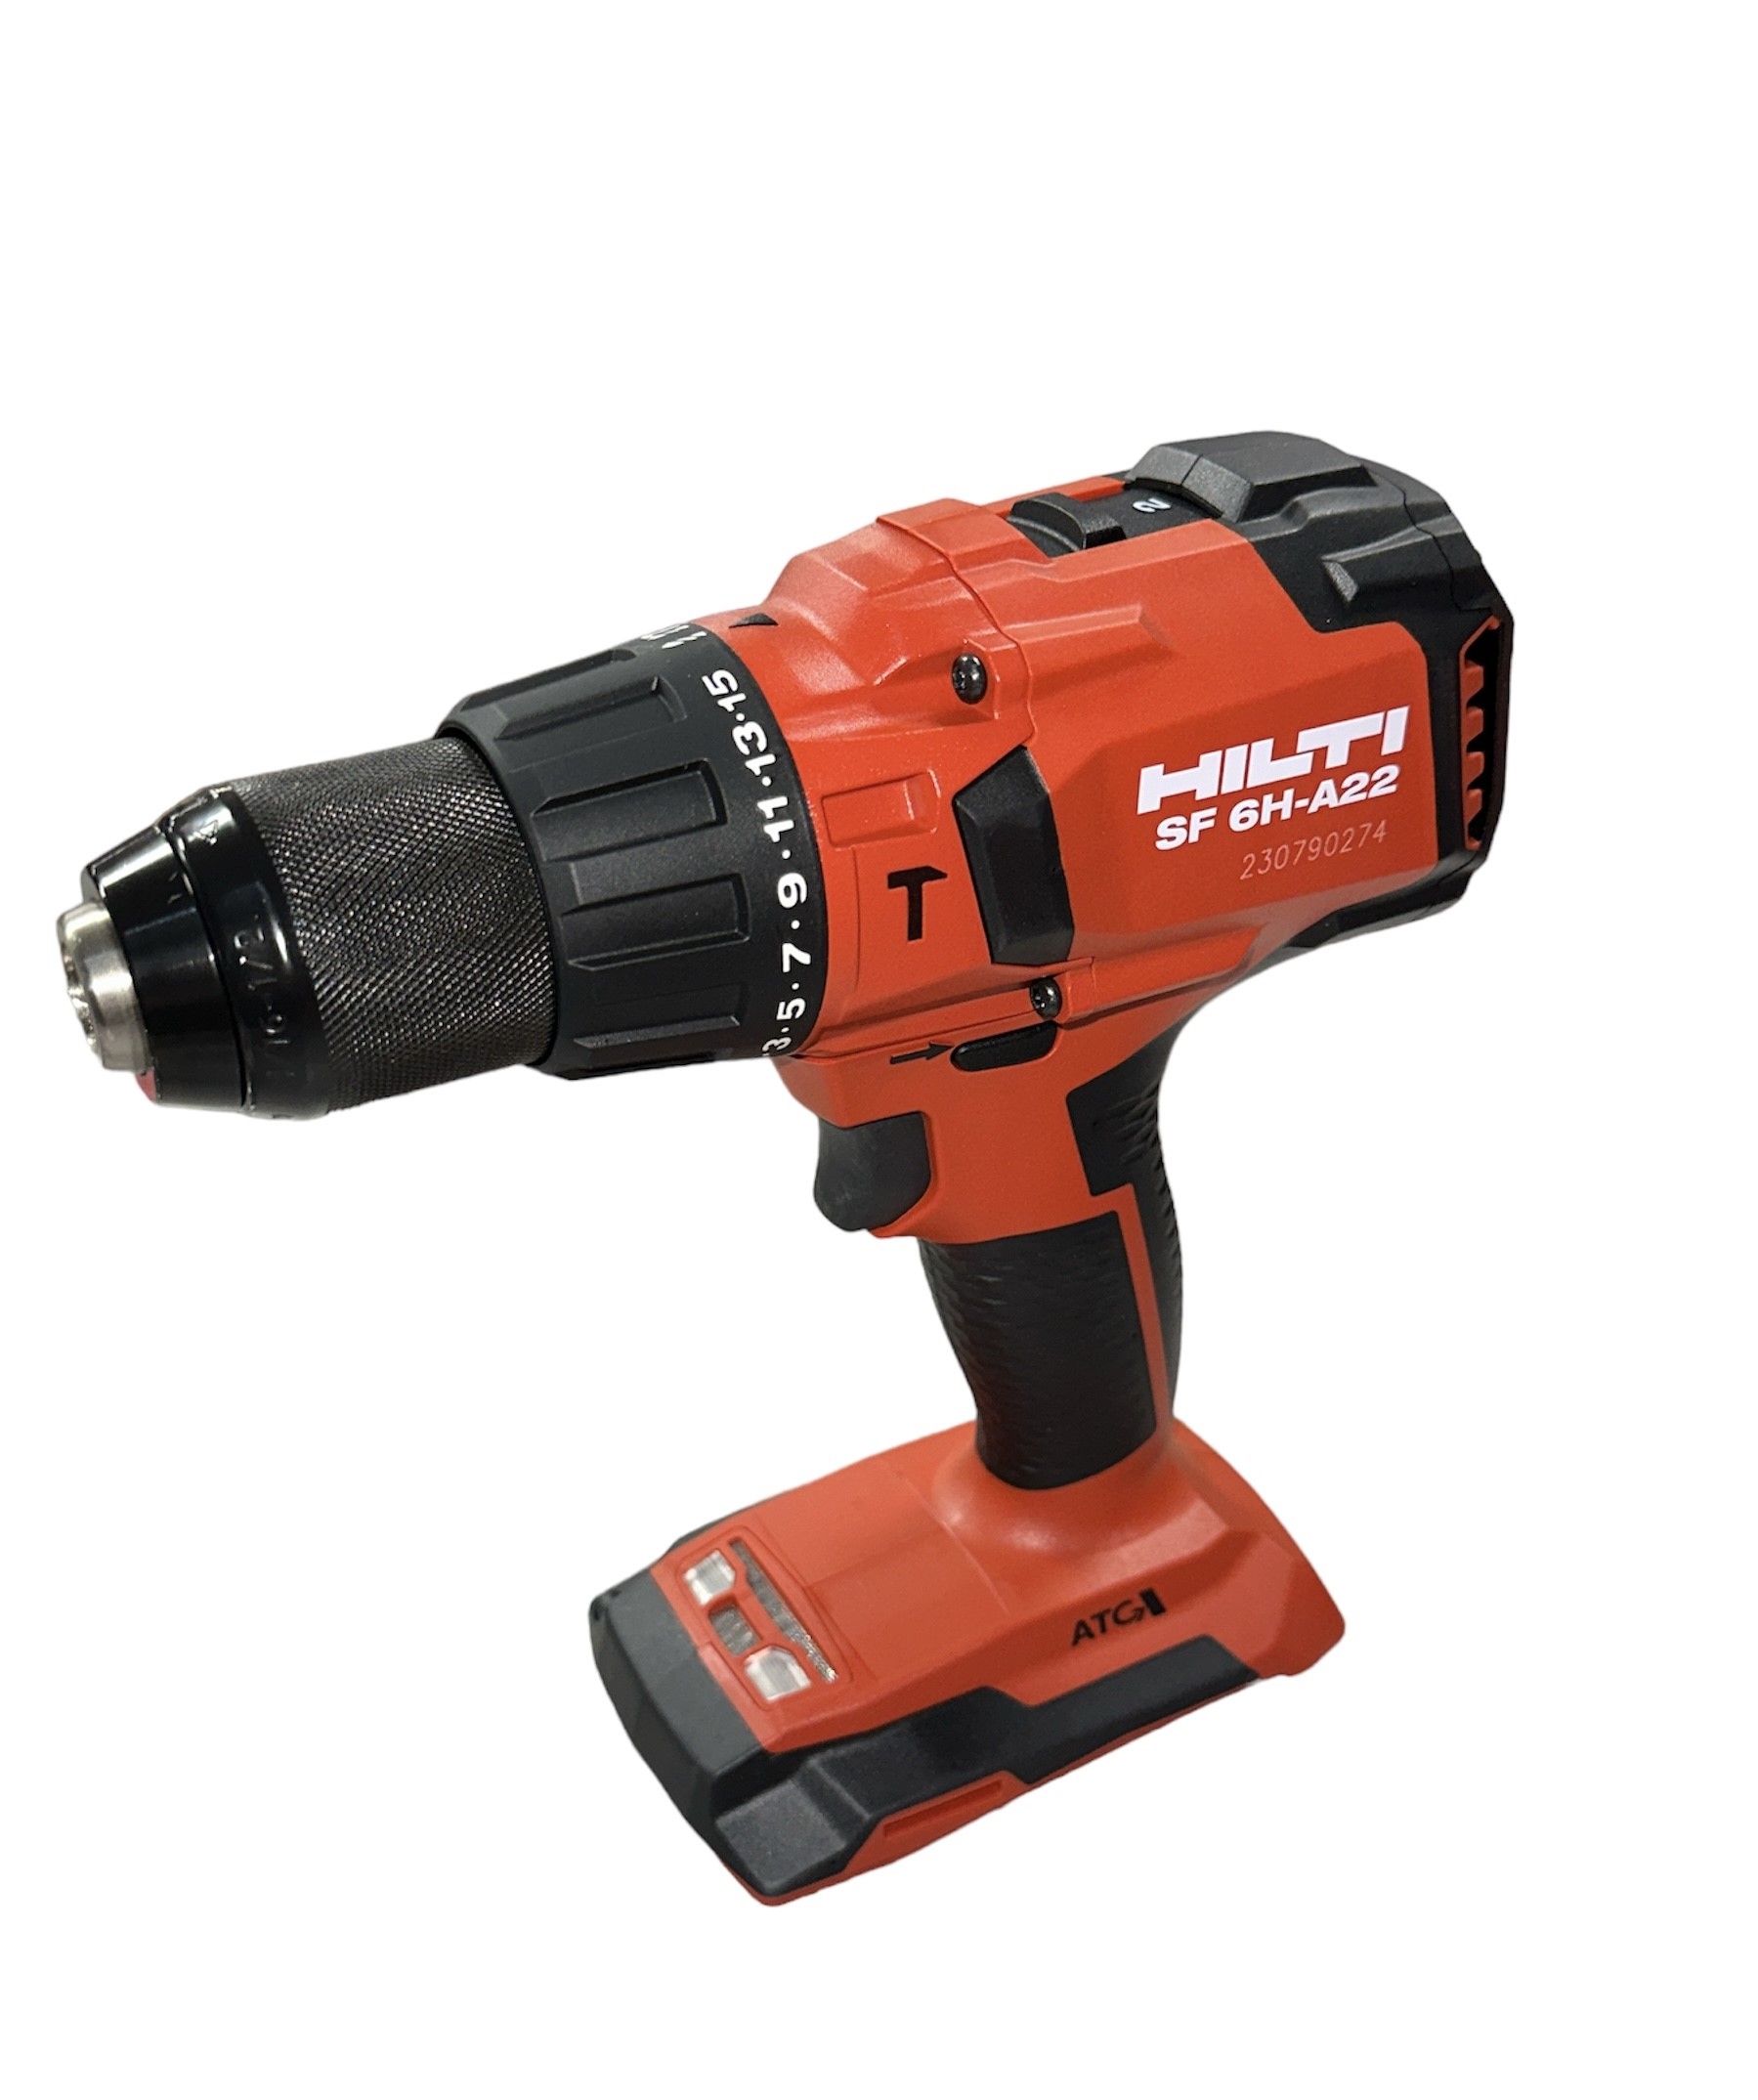 HILTI - SF 6H- A22 WITH BATTERY AND CHARGER - AS NEW